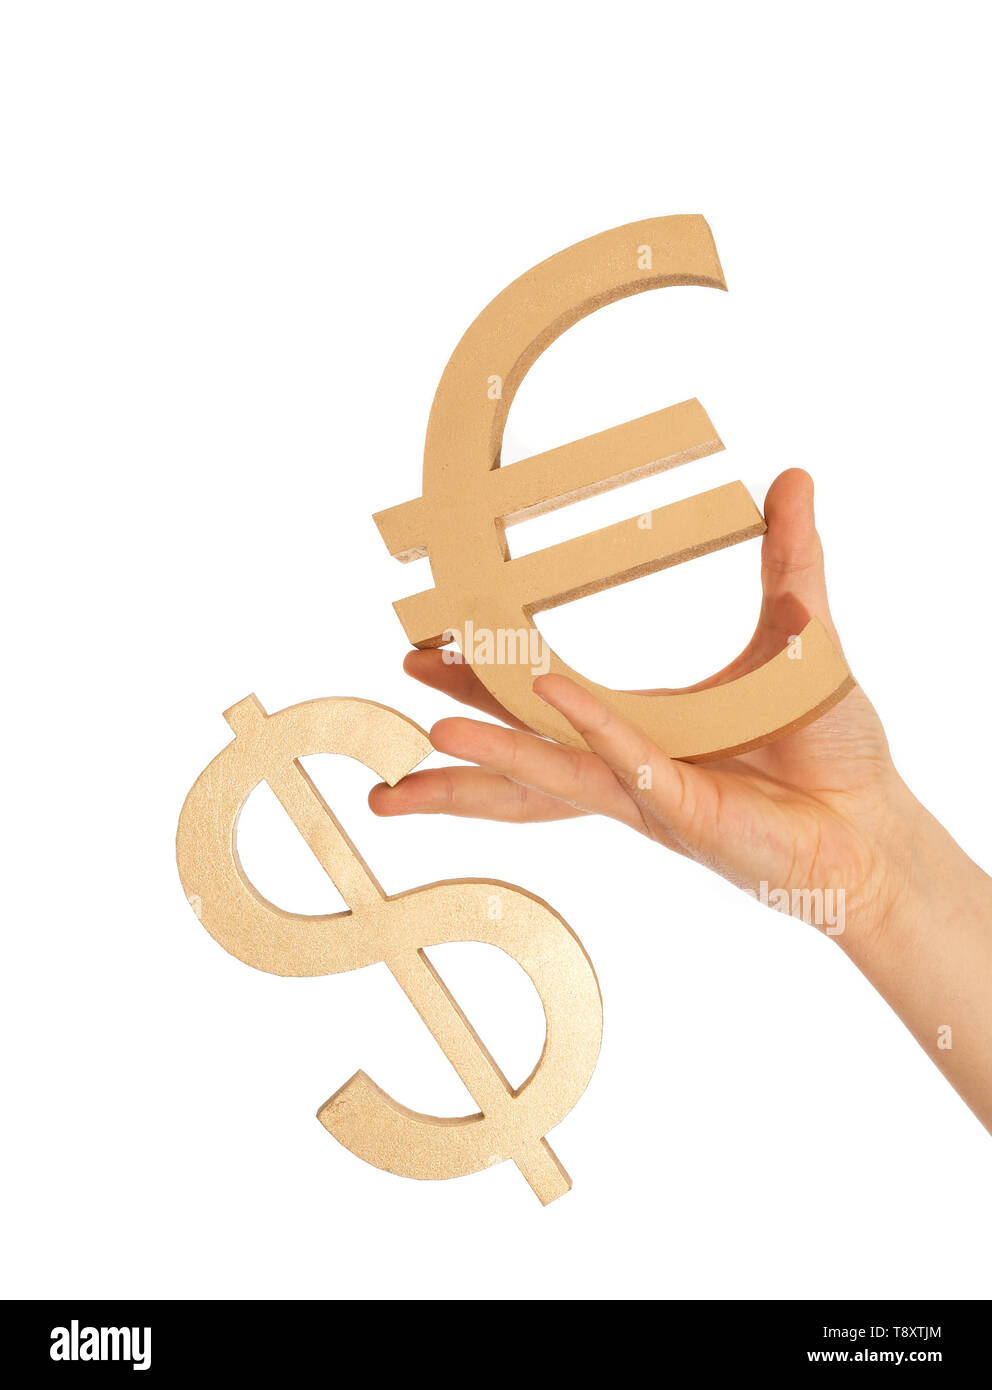 Dollar is falling and euro is steady Stock Photo